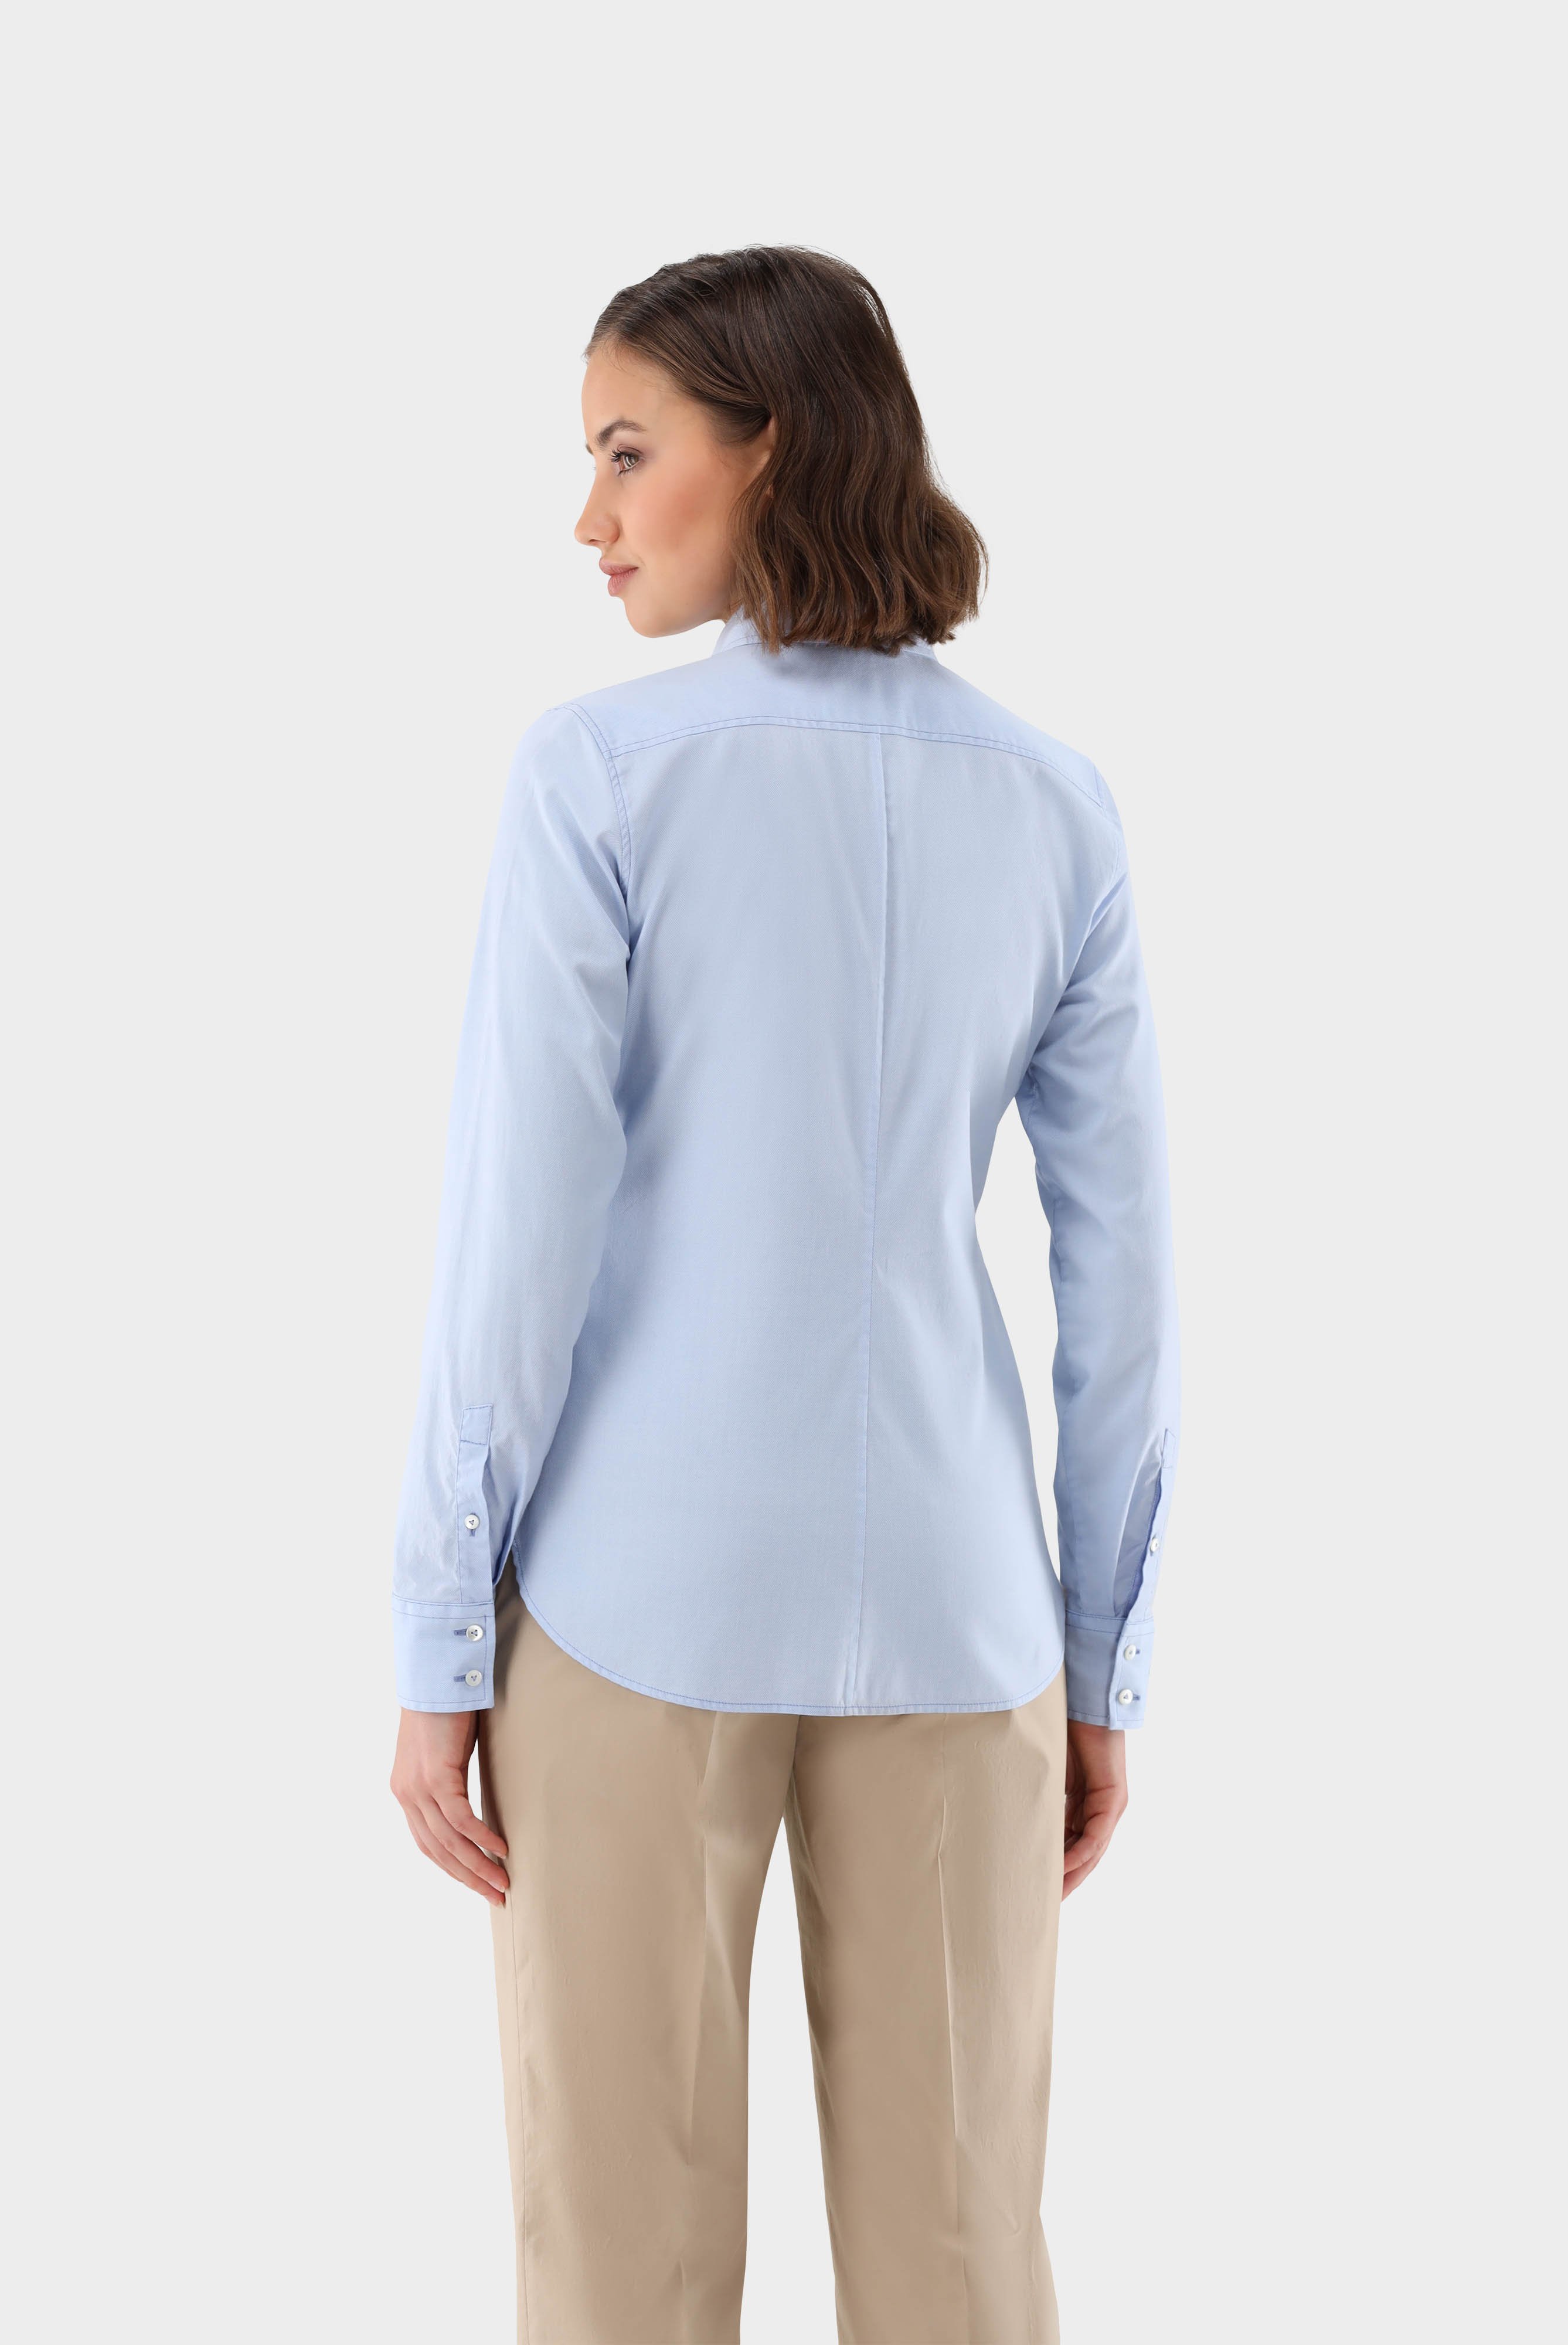 Business Blouses+Fitted Shirt Blouse in Cotton Stretch+05.524A.Z2.150272.720.32